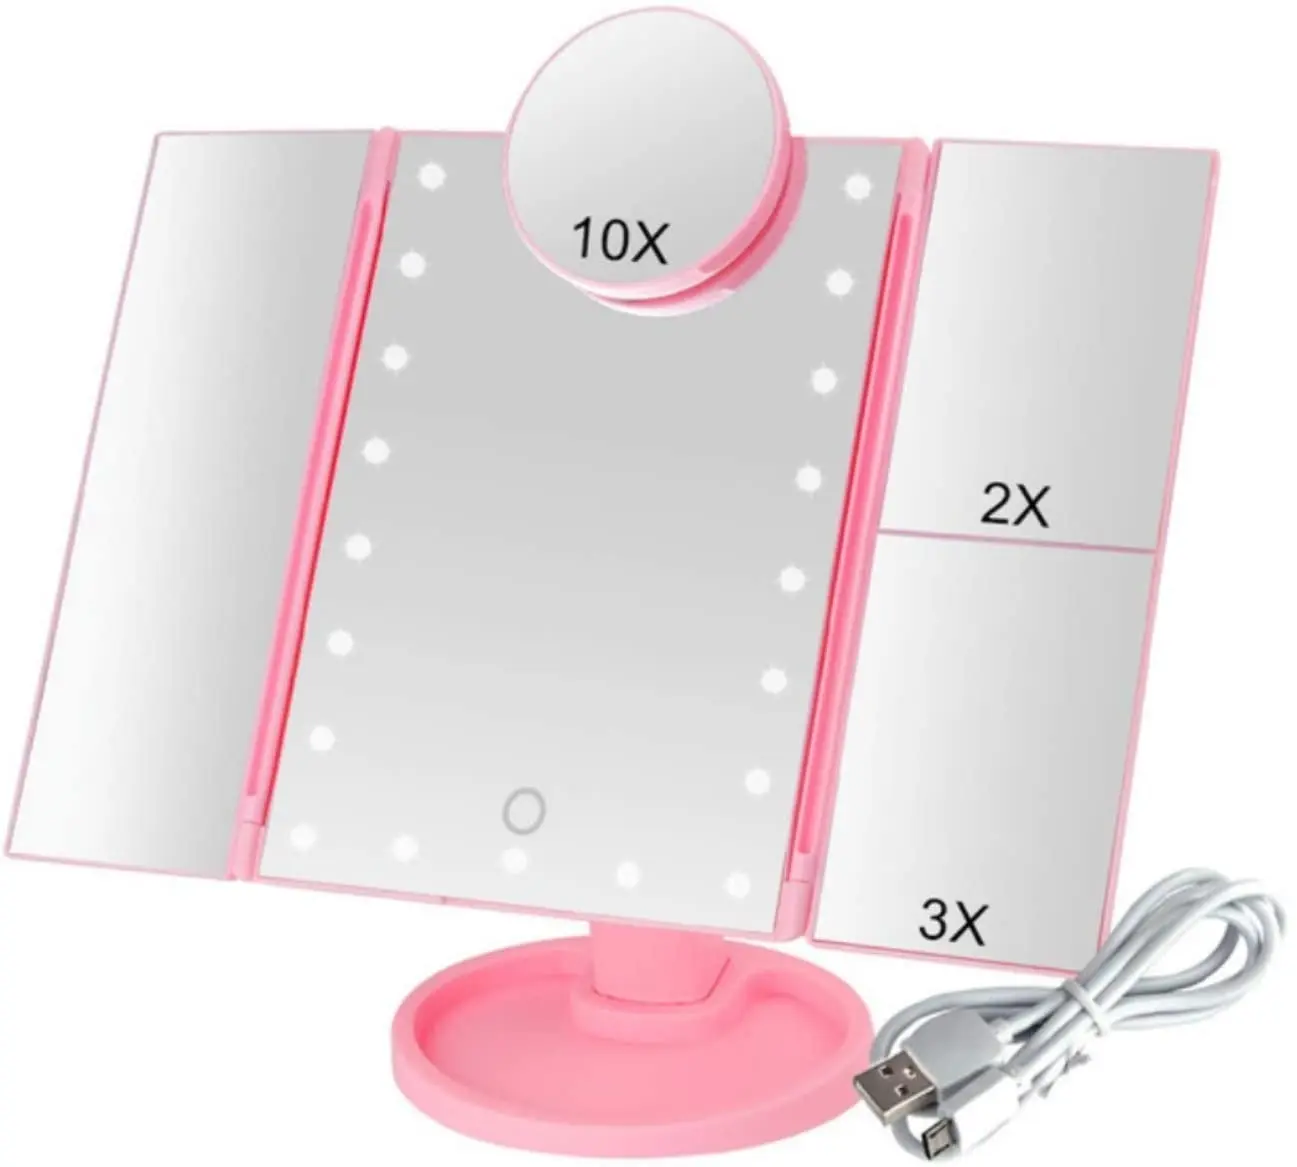 

Makeup Mirror with Dimmalble LED Lights, Tri-Fold, 1x/2x/3x Magnification, 180 Adjustable Rotation Cosmetic Lighted Up Mirror Ra